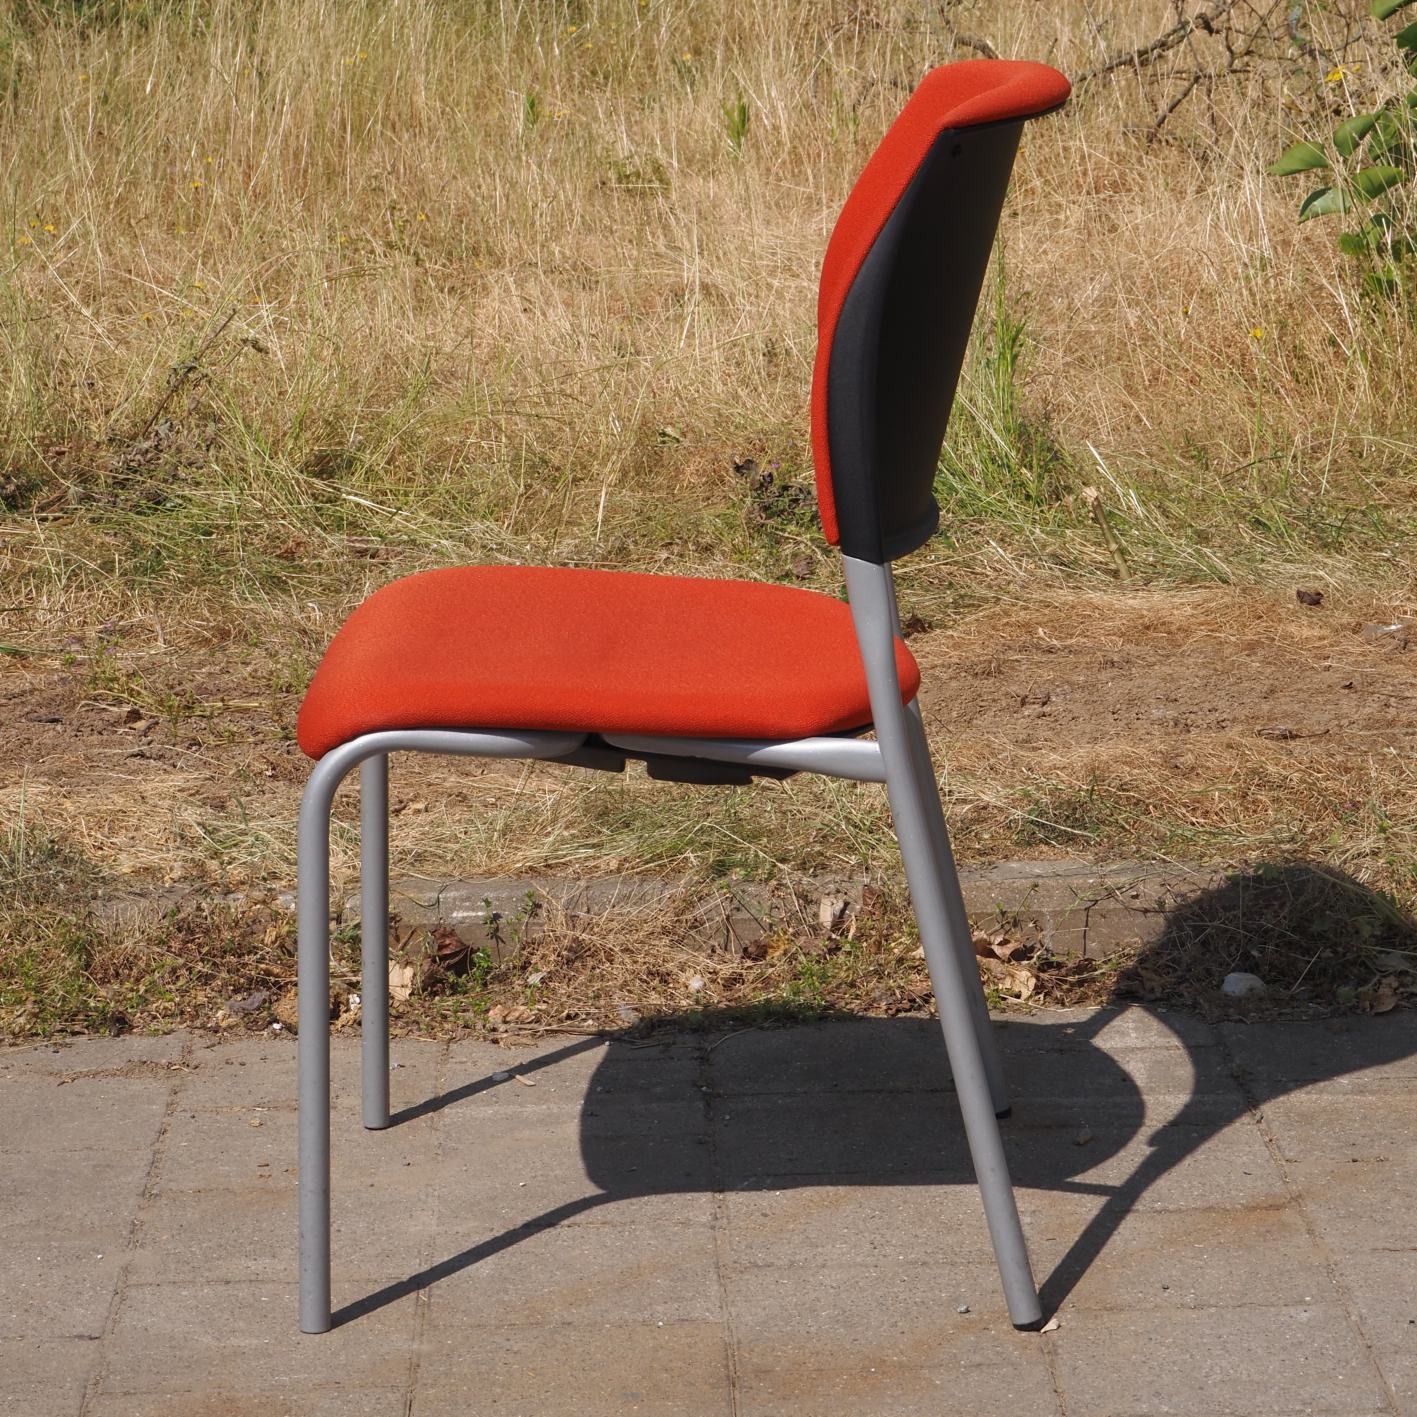 Chair by Drabert in orange fabric and steel frame